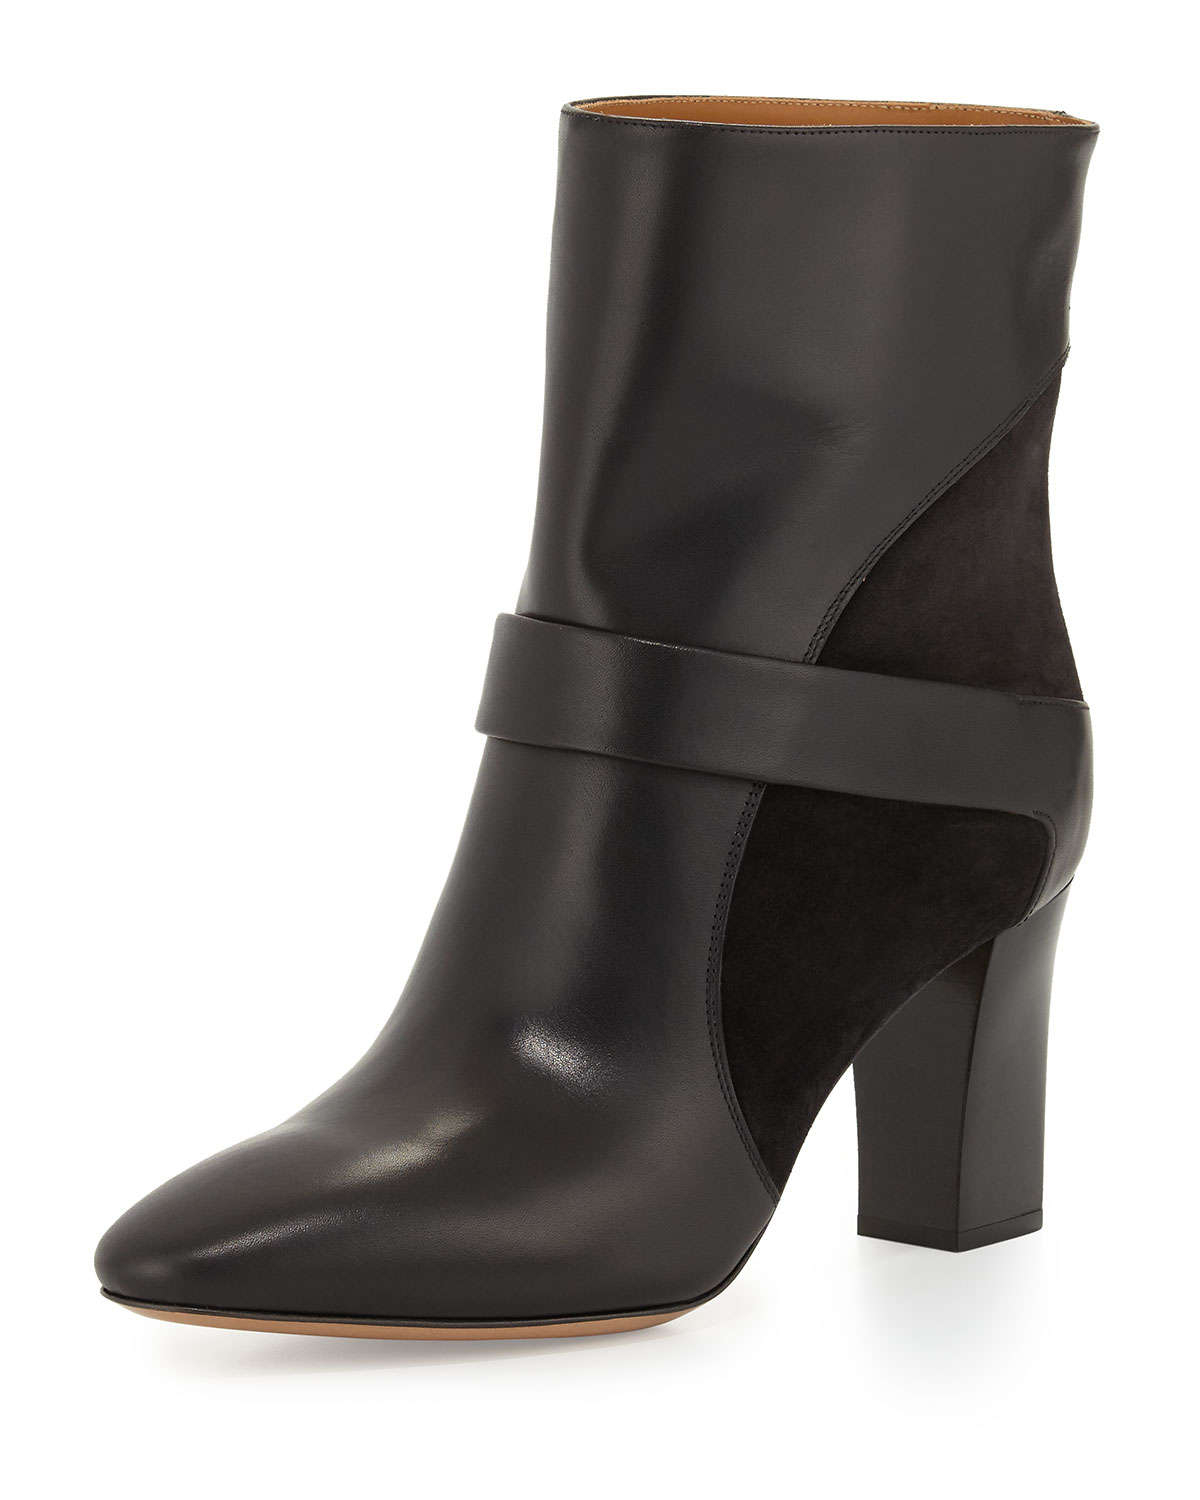 Chloé Leather Chunky-Heel Boot in Black | Lyst